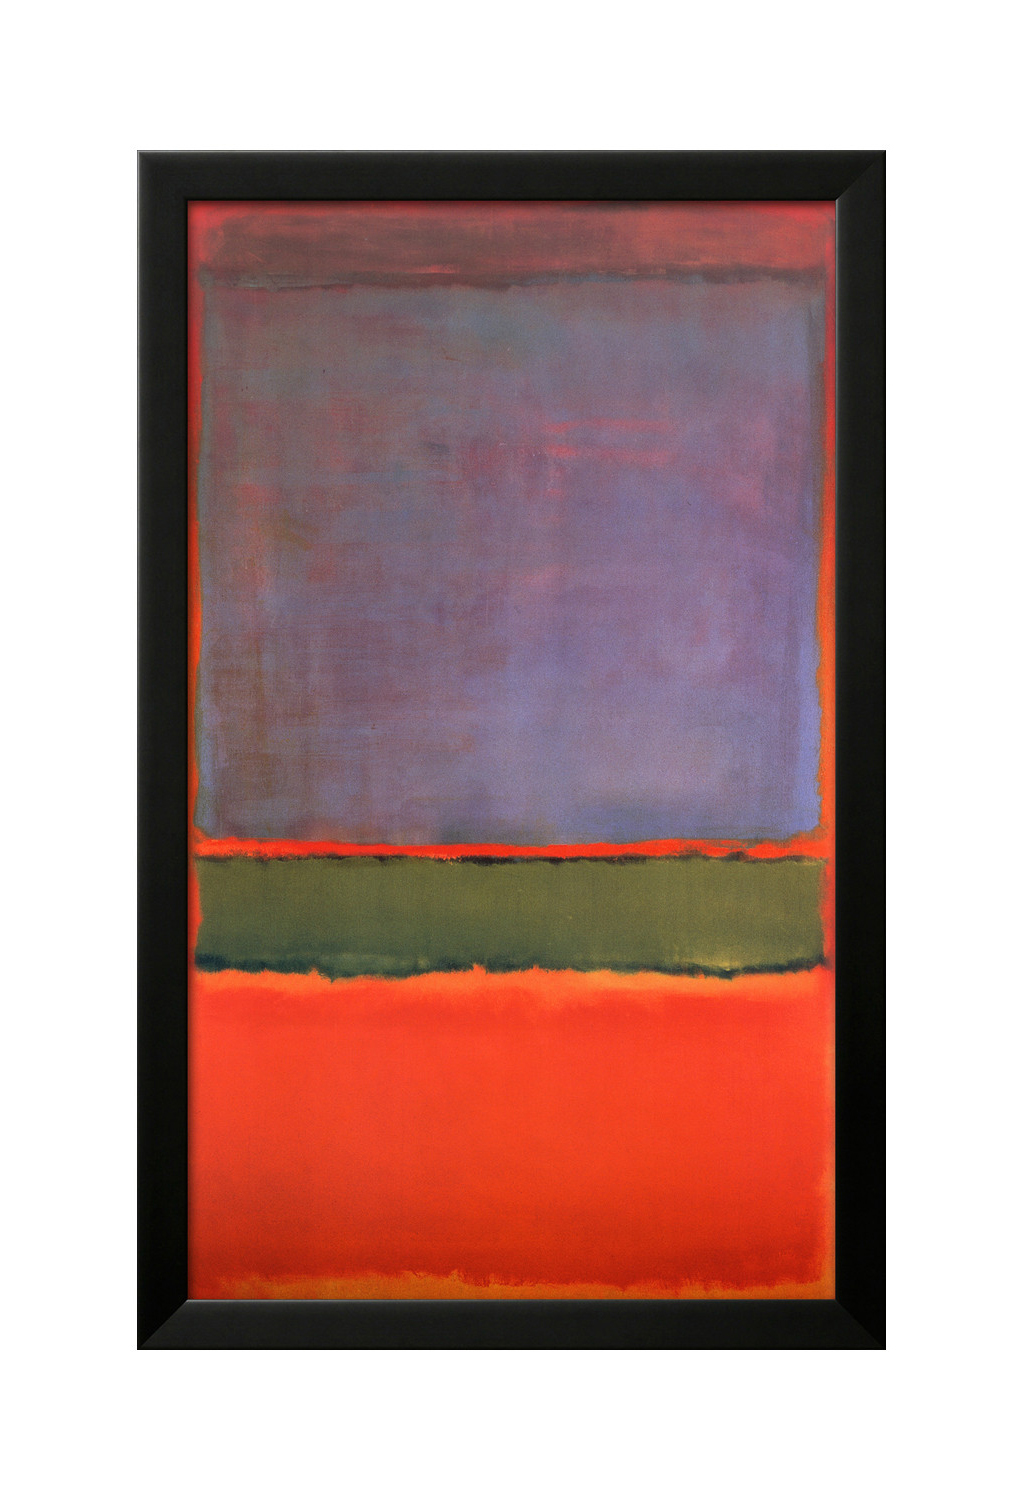 No:6 (Violet, Green and Red), Mark Rothko